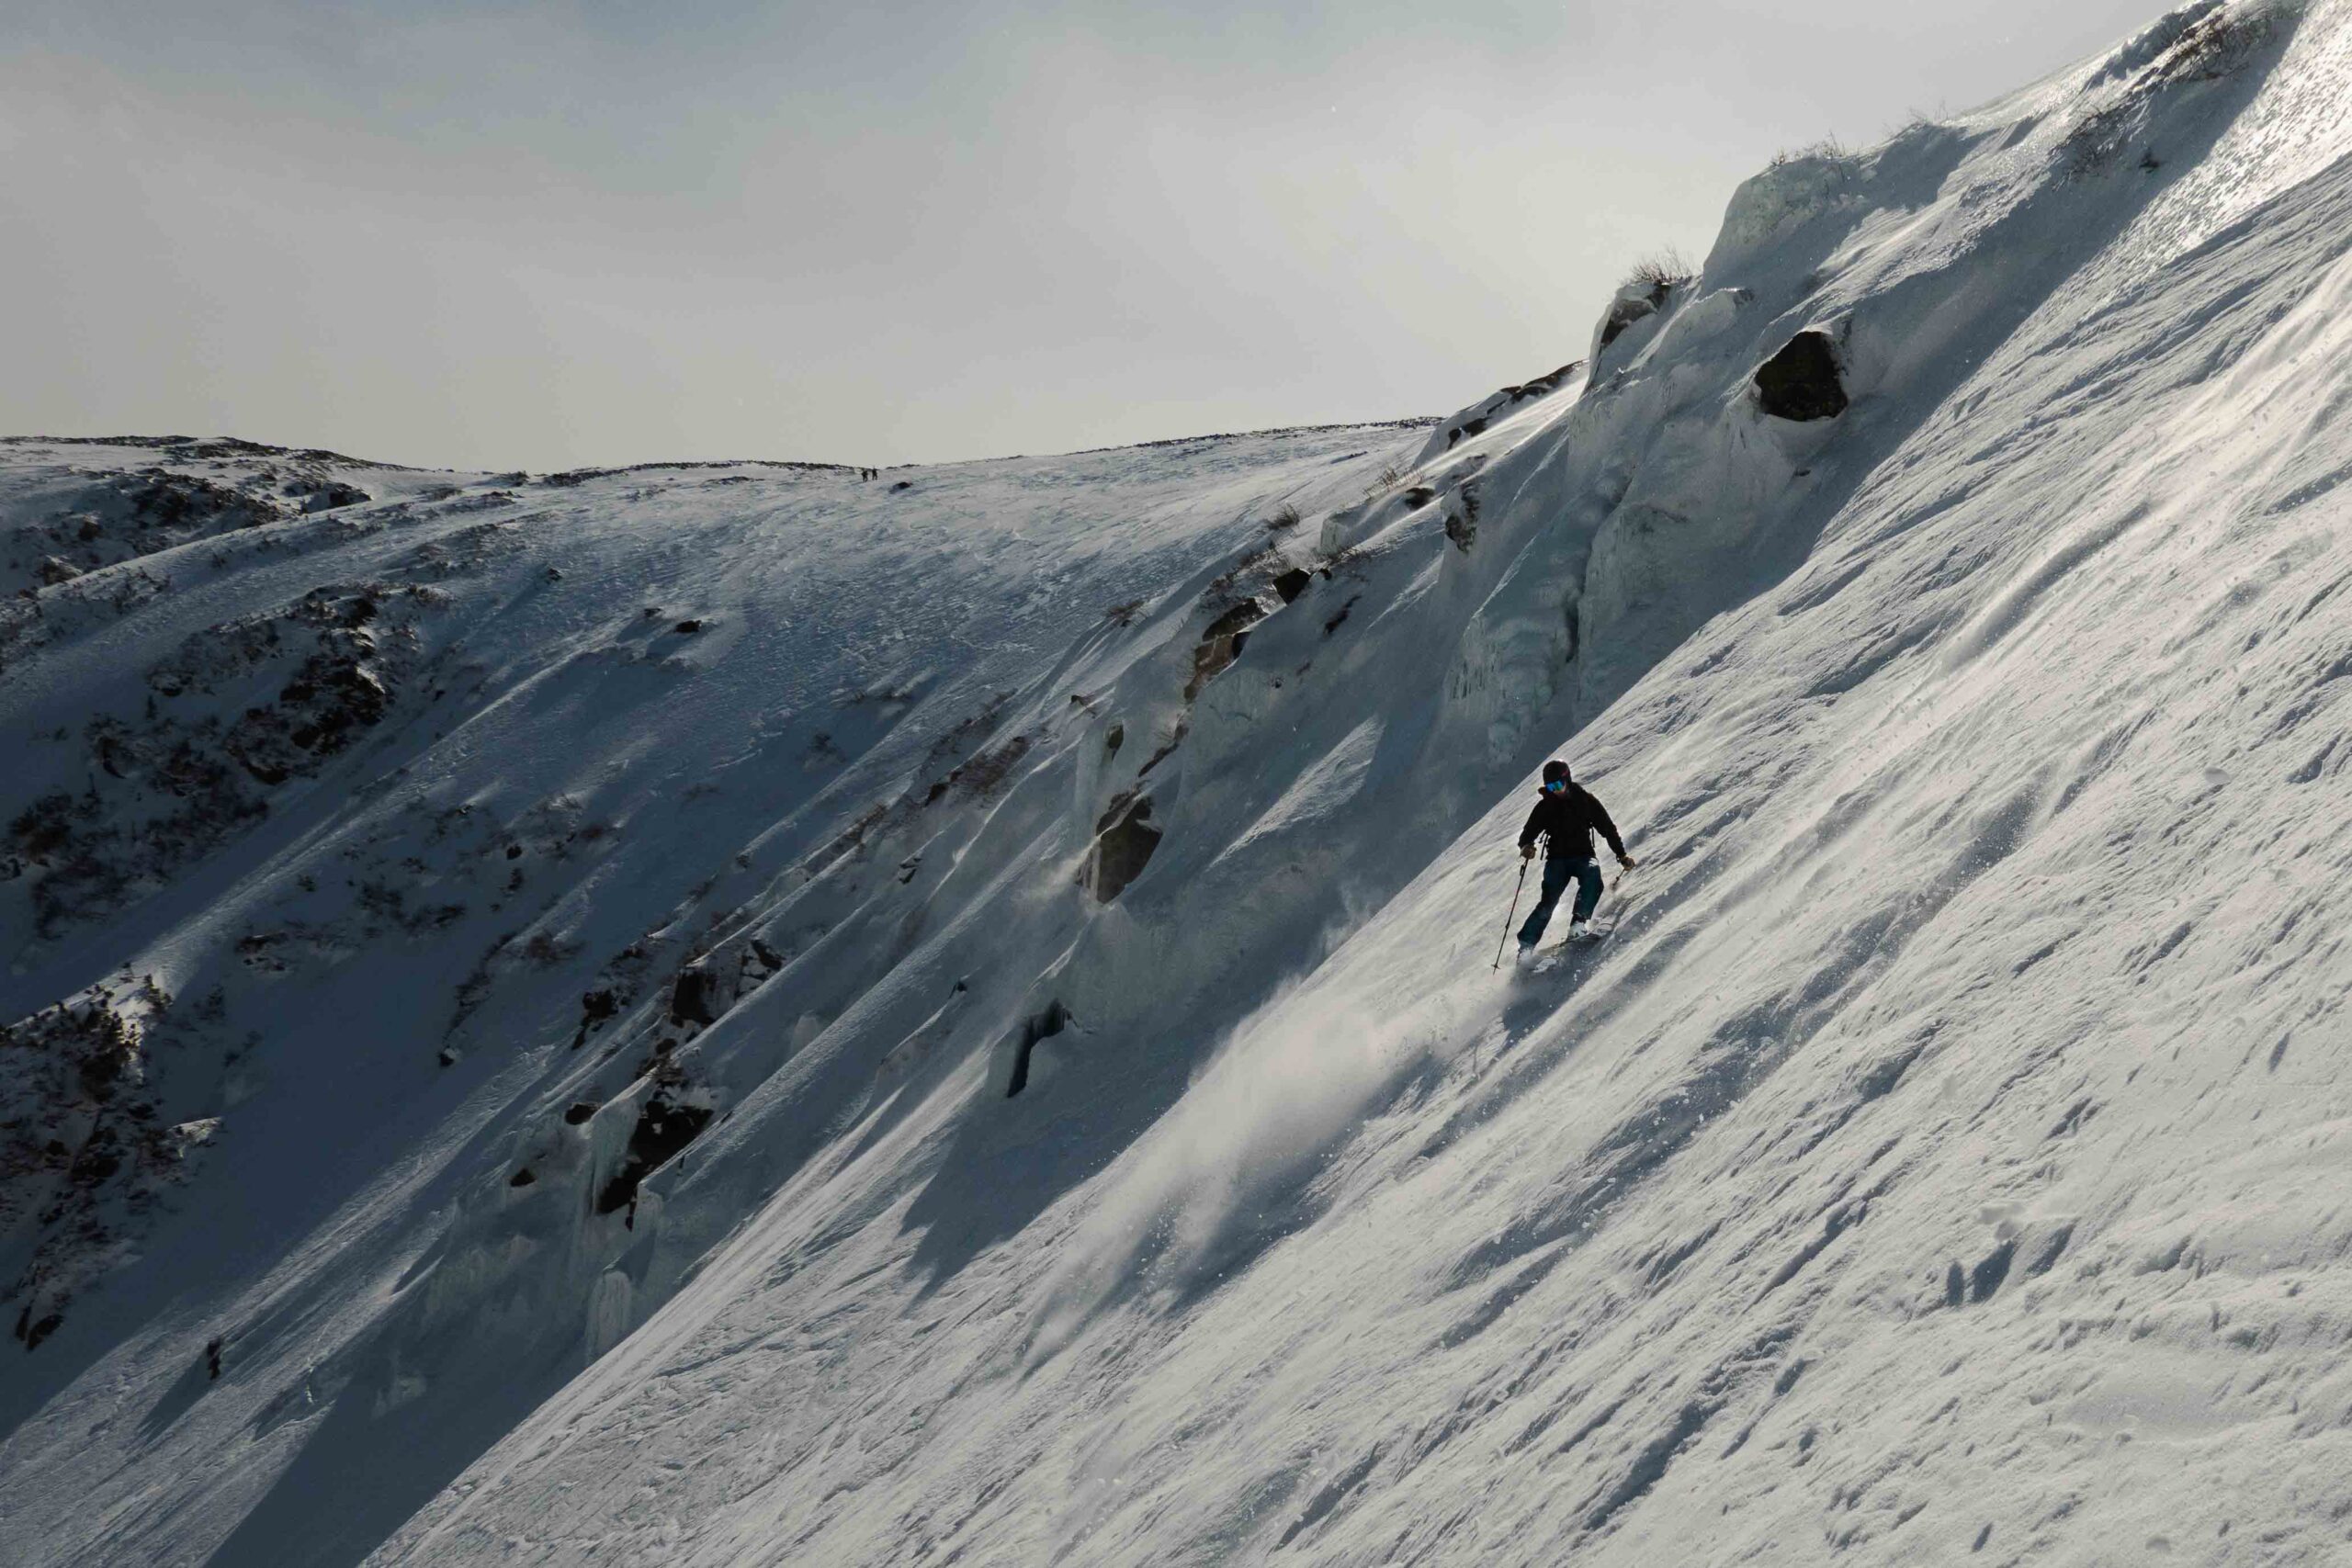 Carnage in Tuckerman Ravine: Extreme Backcountry Skiing, With an Audience